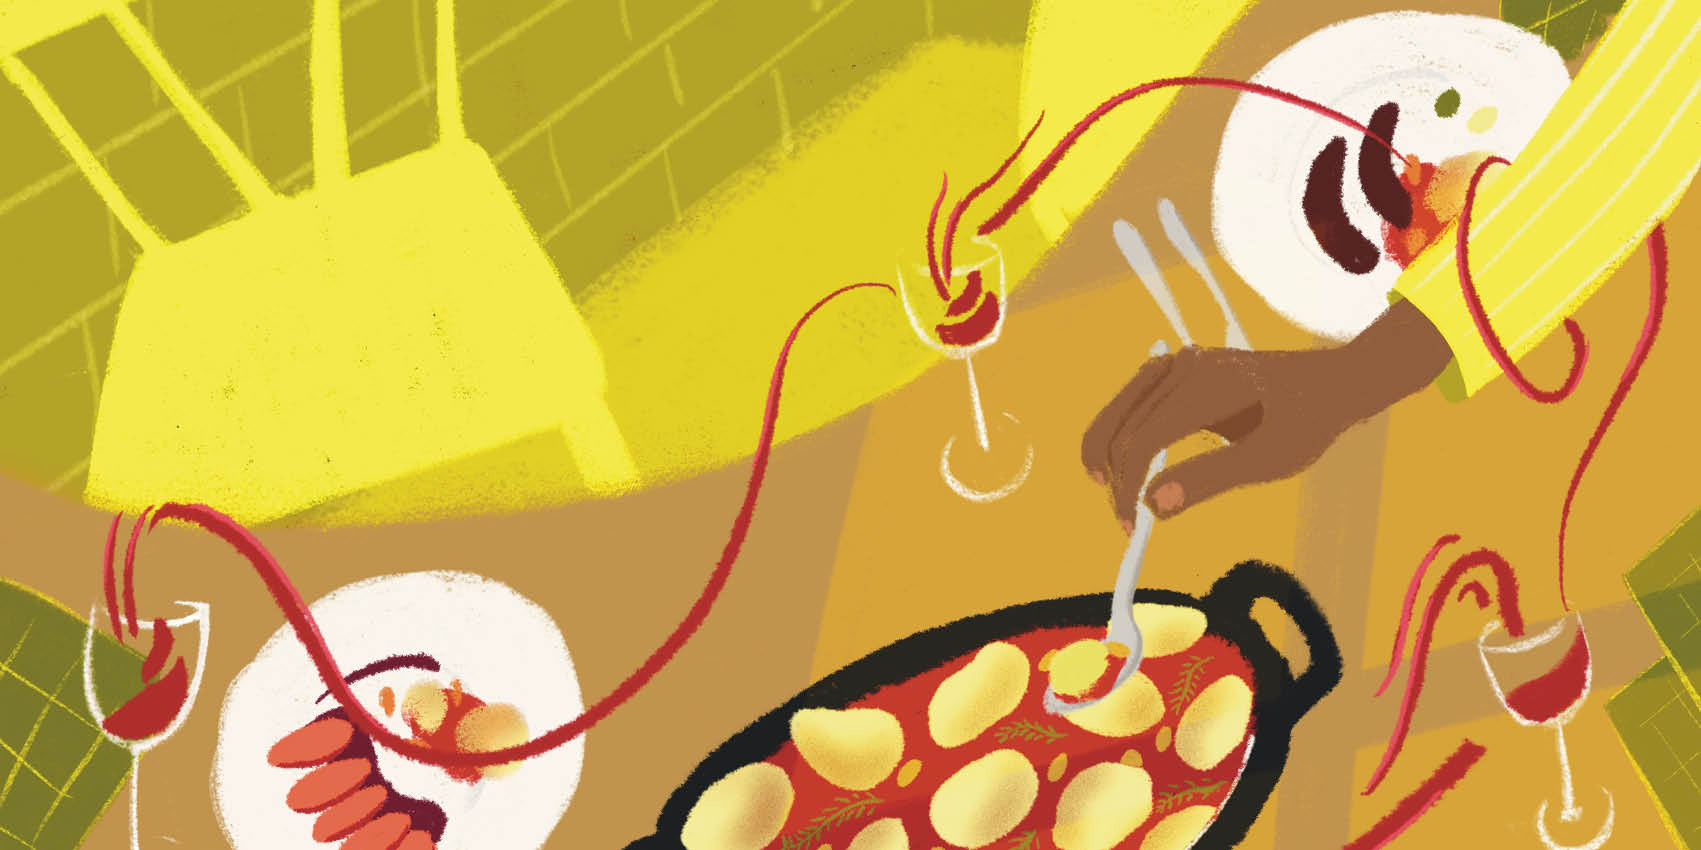 A banner to show that we're moving into a new season. Here winter, with a colorful and jazzy illustration, showing hands helping themselves to food, glasses of wine, a dish of potatoes...